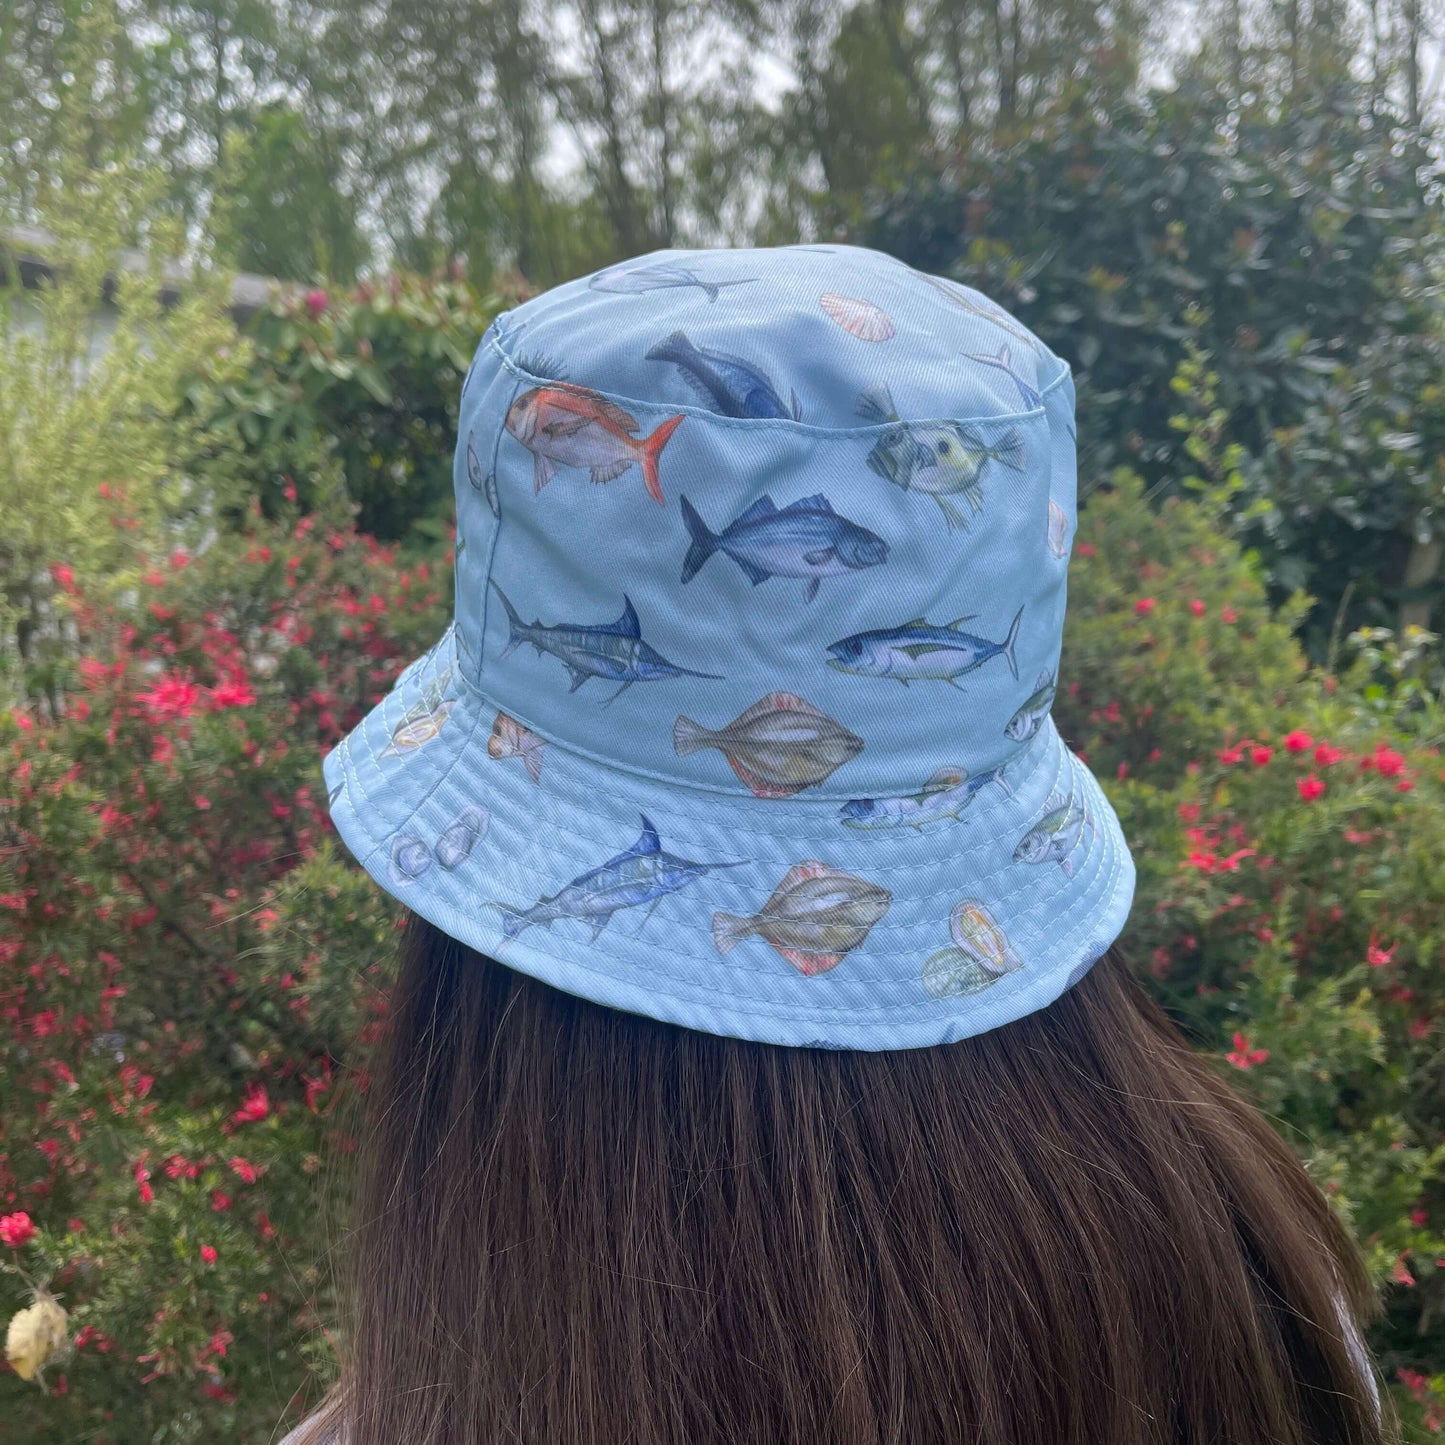 Bucket hat with NZ fish printed on it.